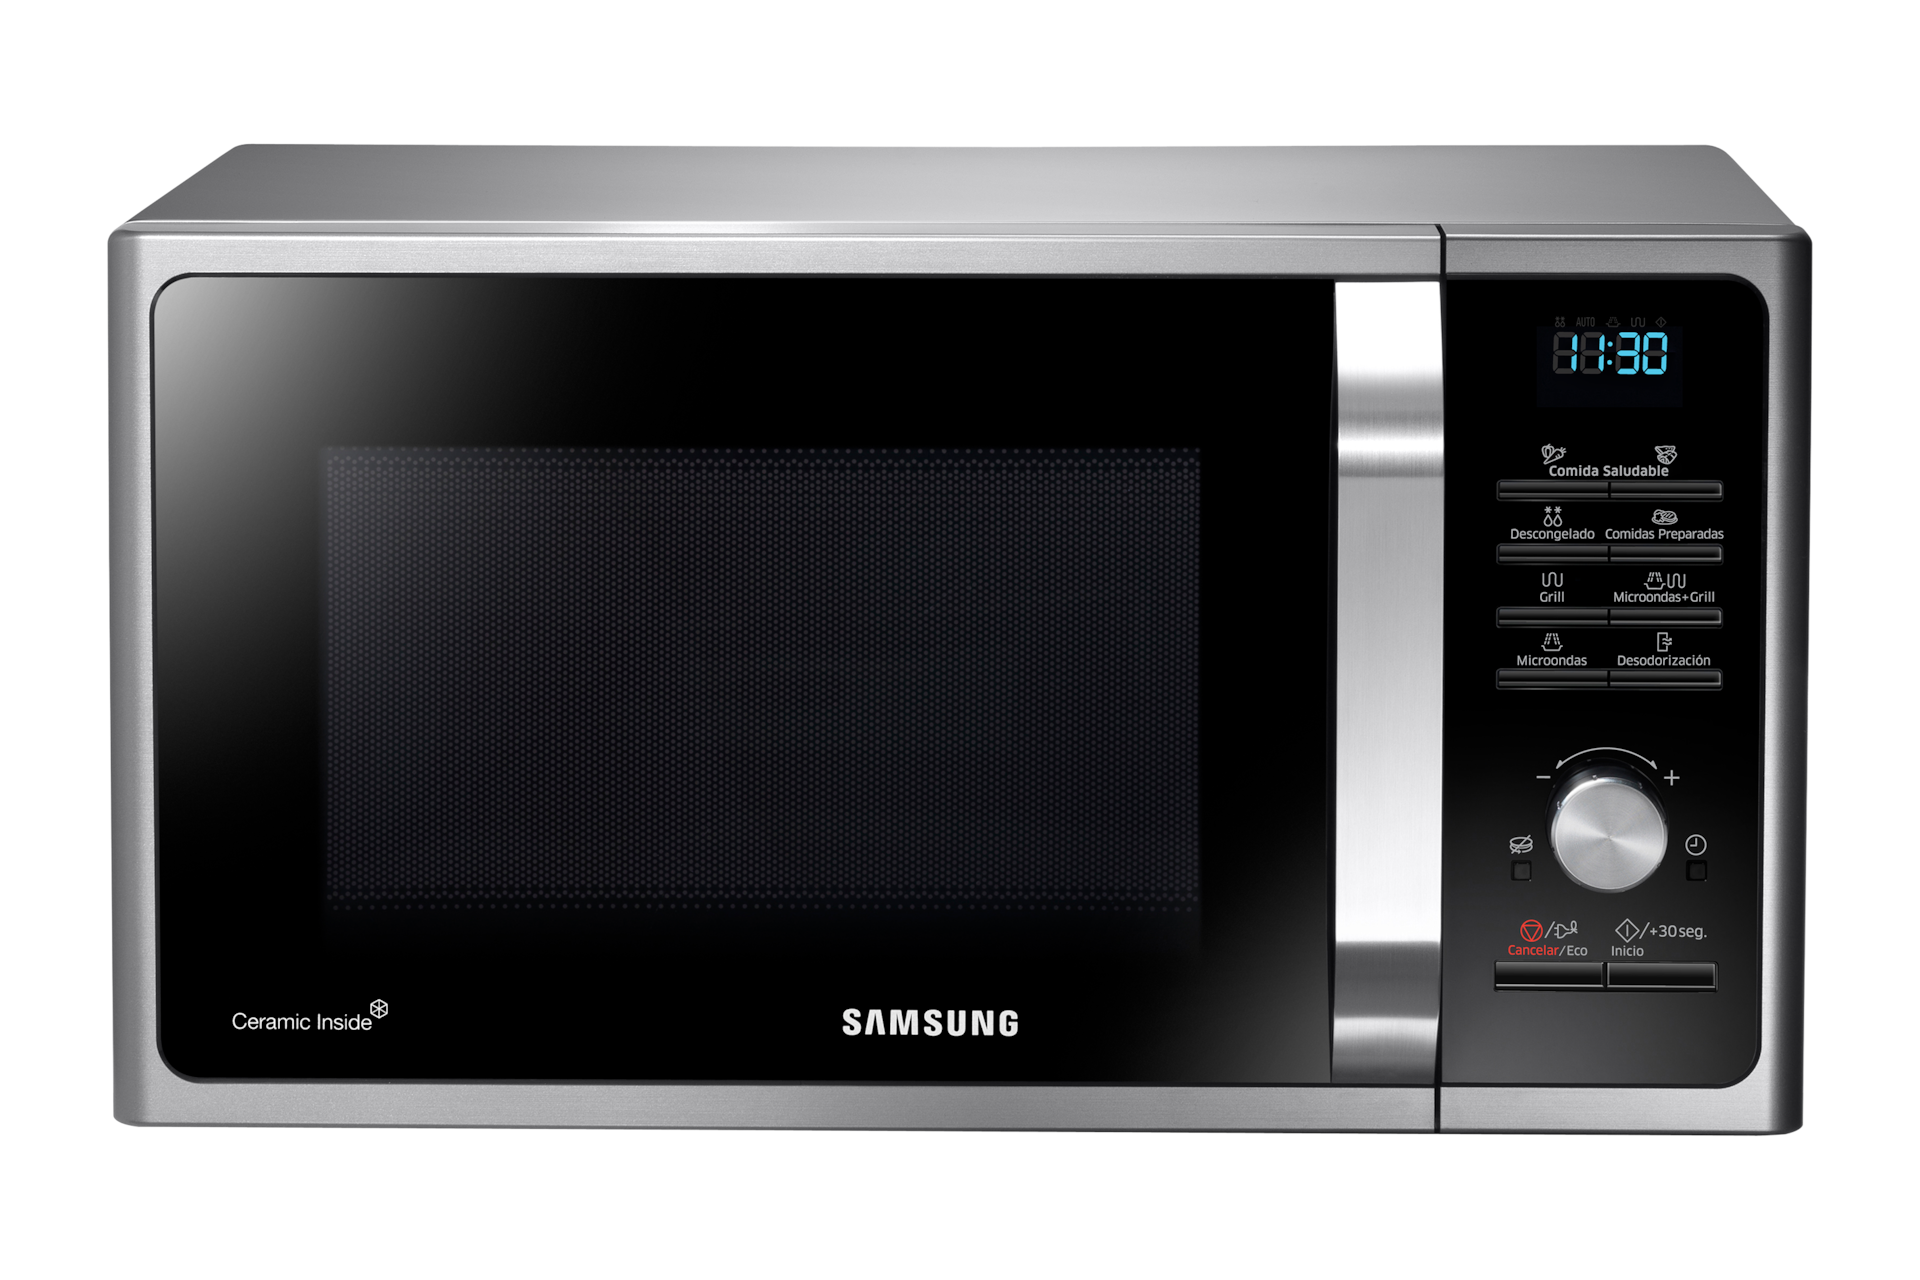 https://images.samsung.com/is/image/samsung/latin-microwave-oven-grill-mg28f303tas-mg28f303tas-ap-frontsilver-90476301?$650_519_PNG$